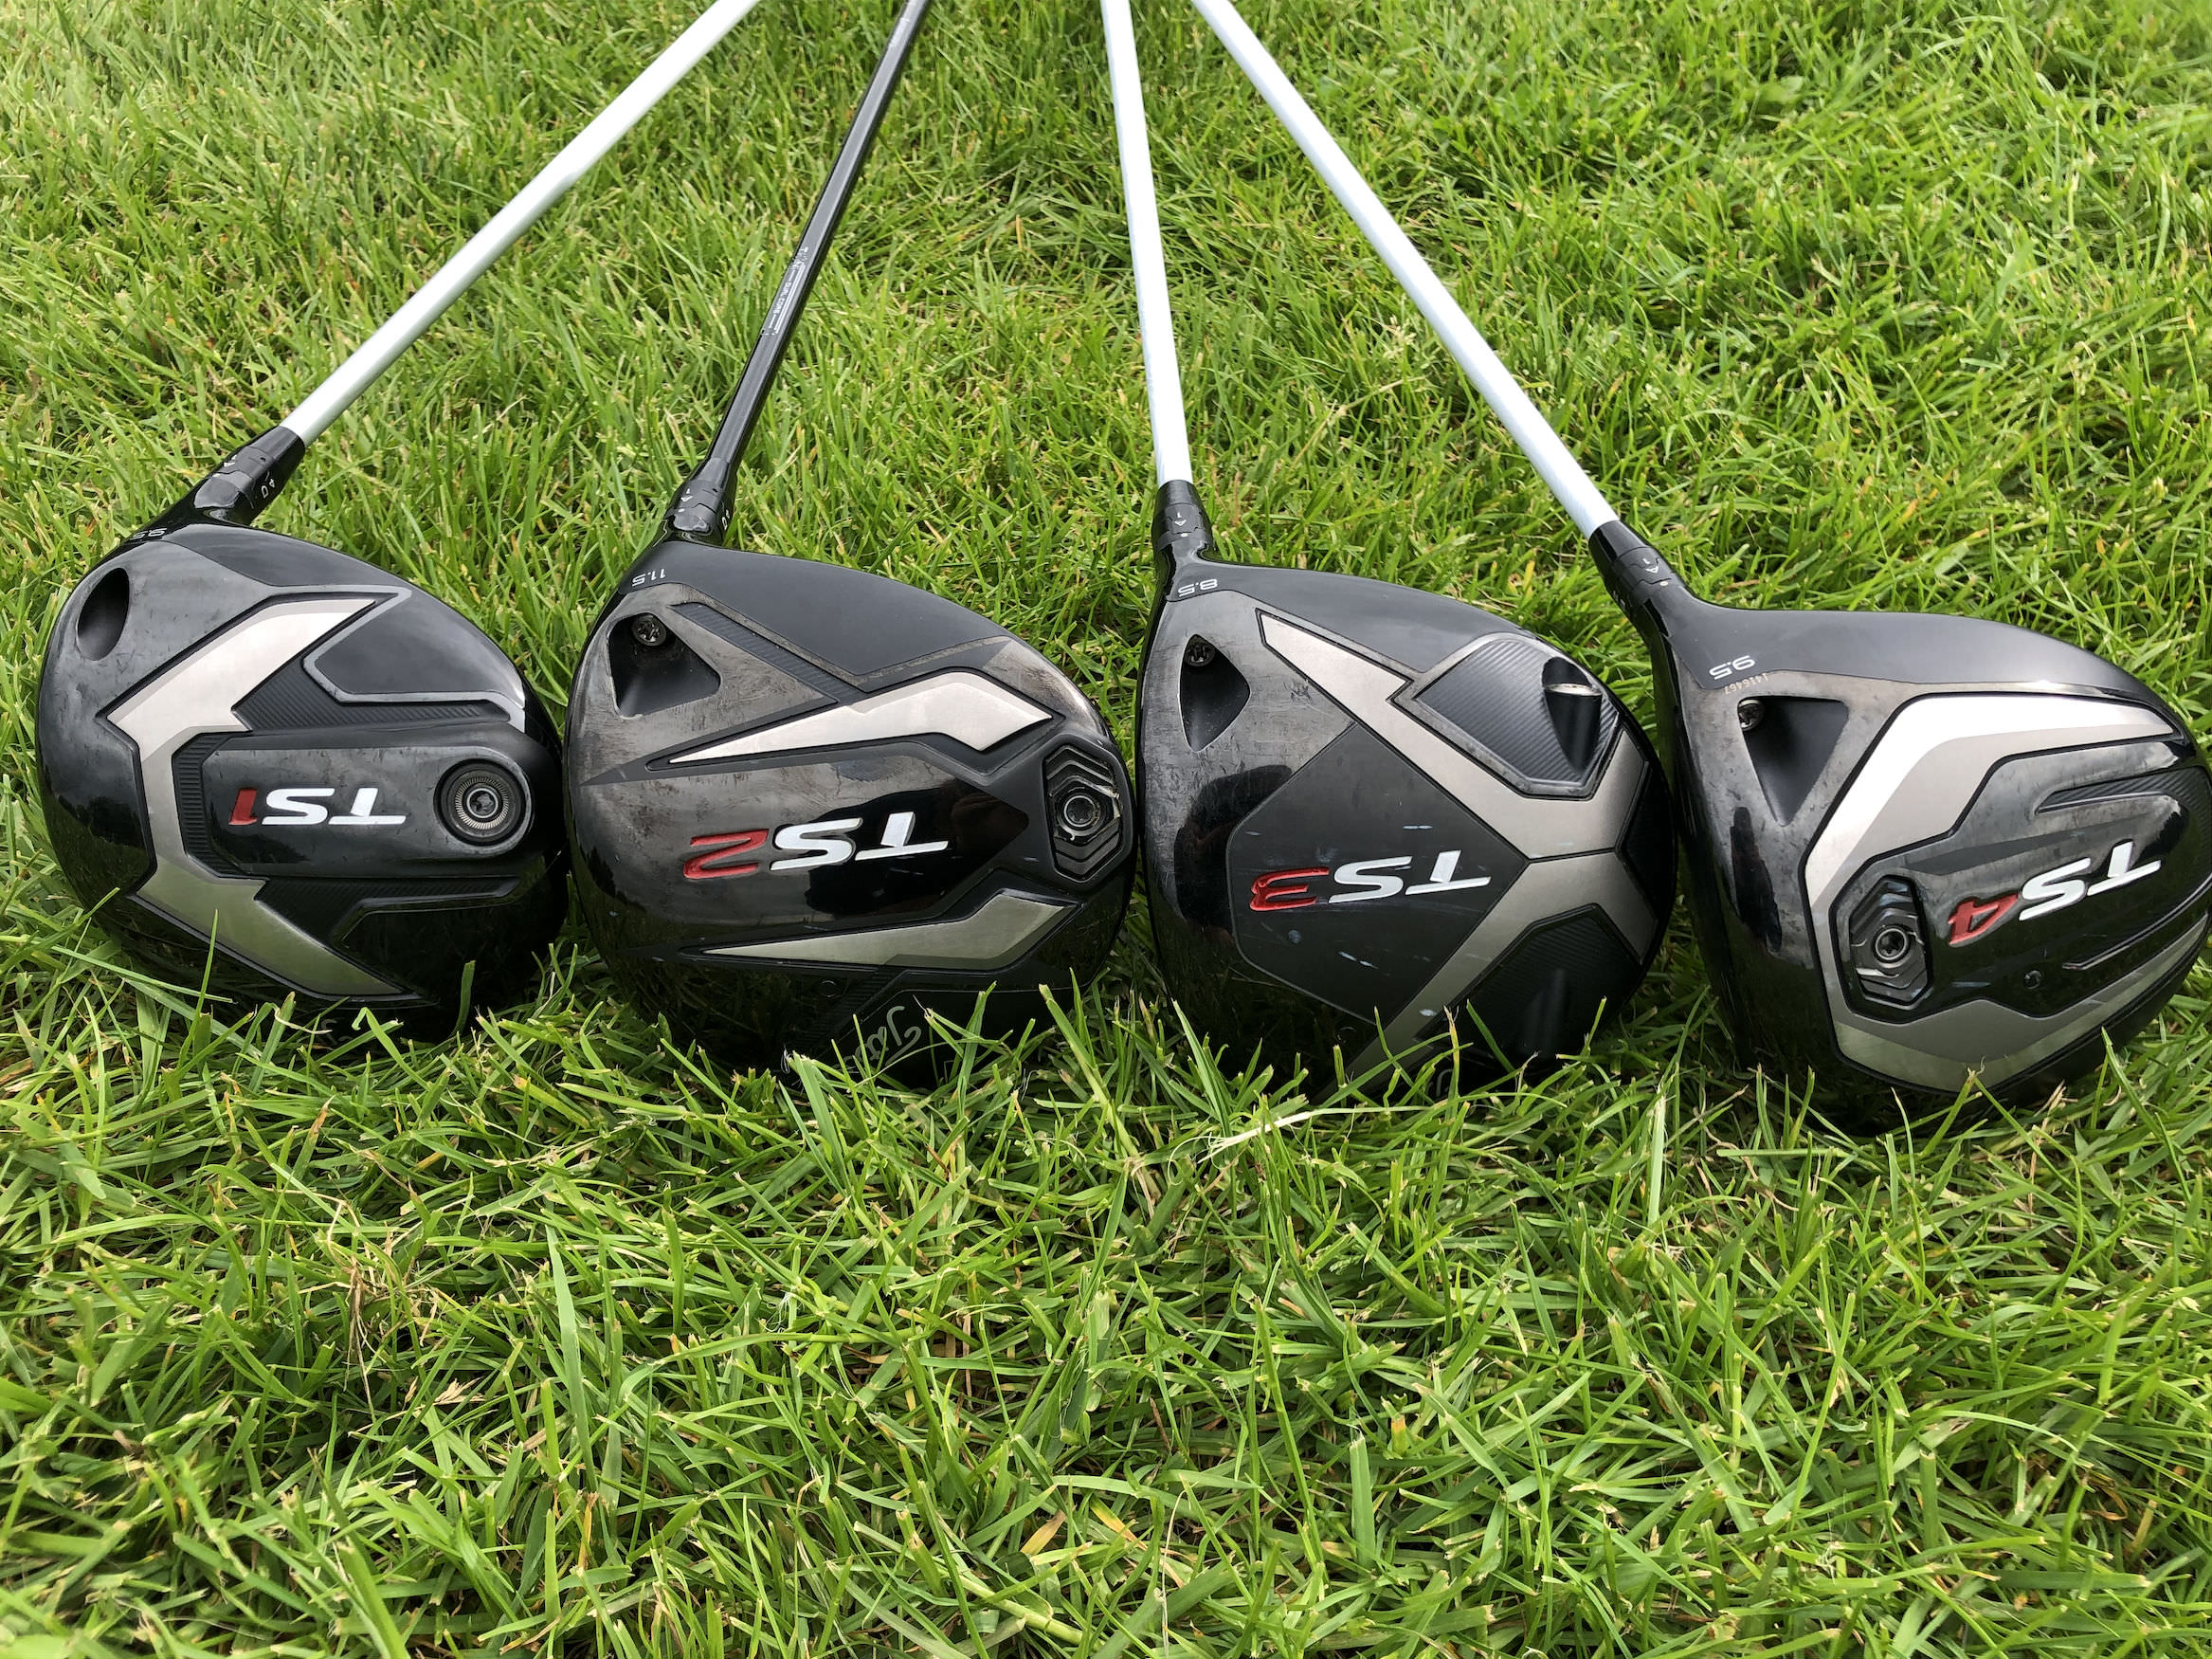 Titleist TS1 driver review